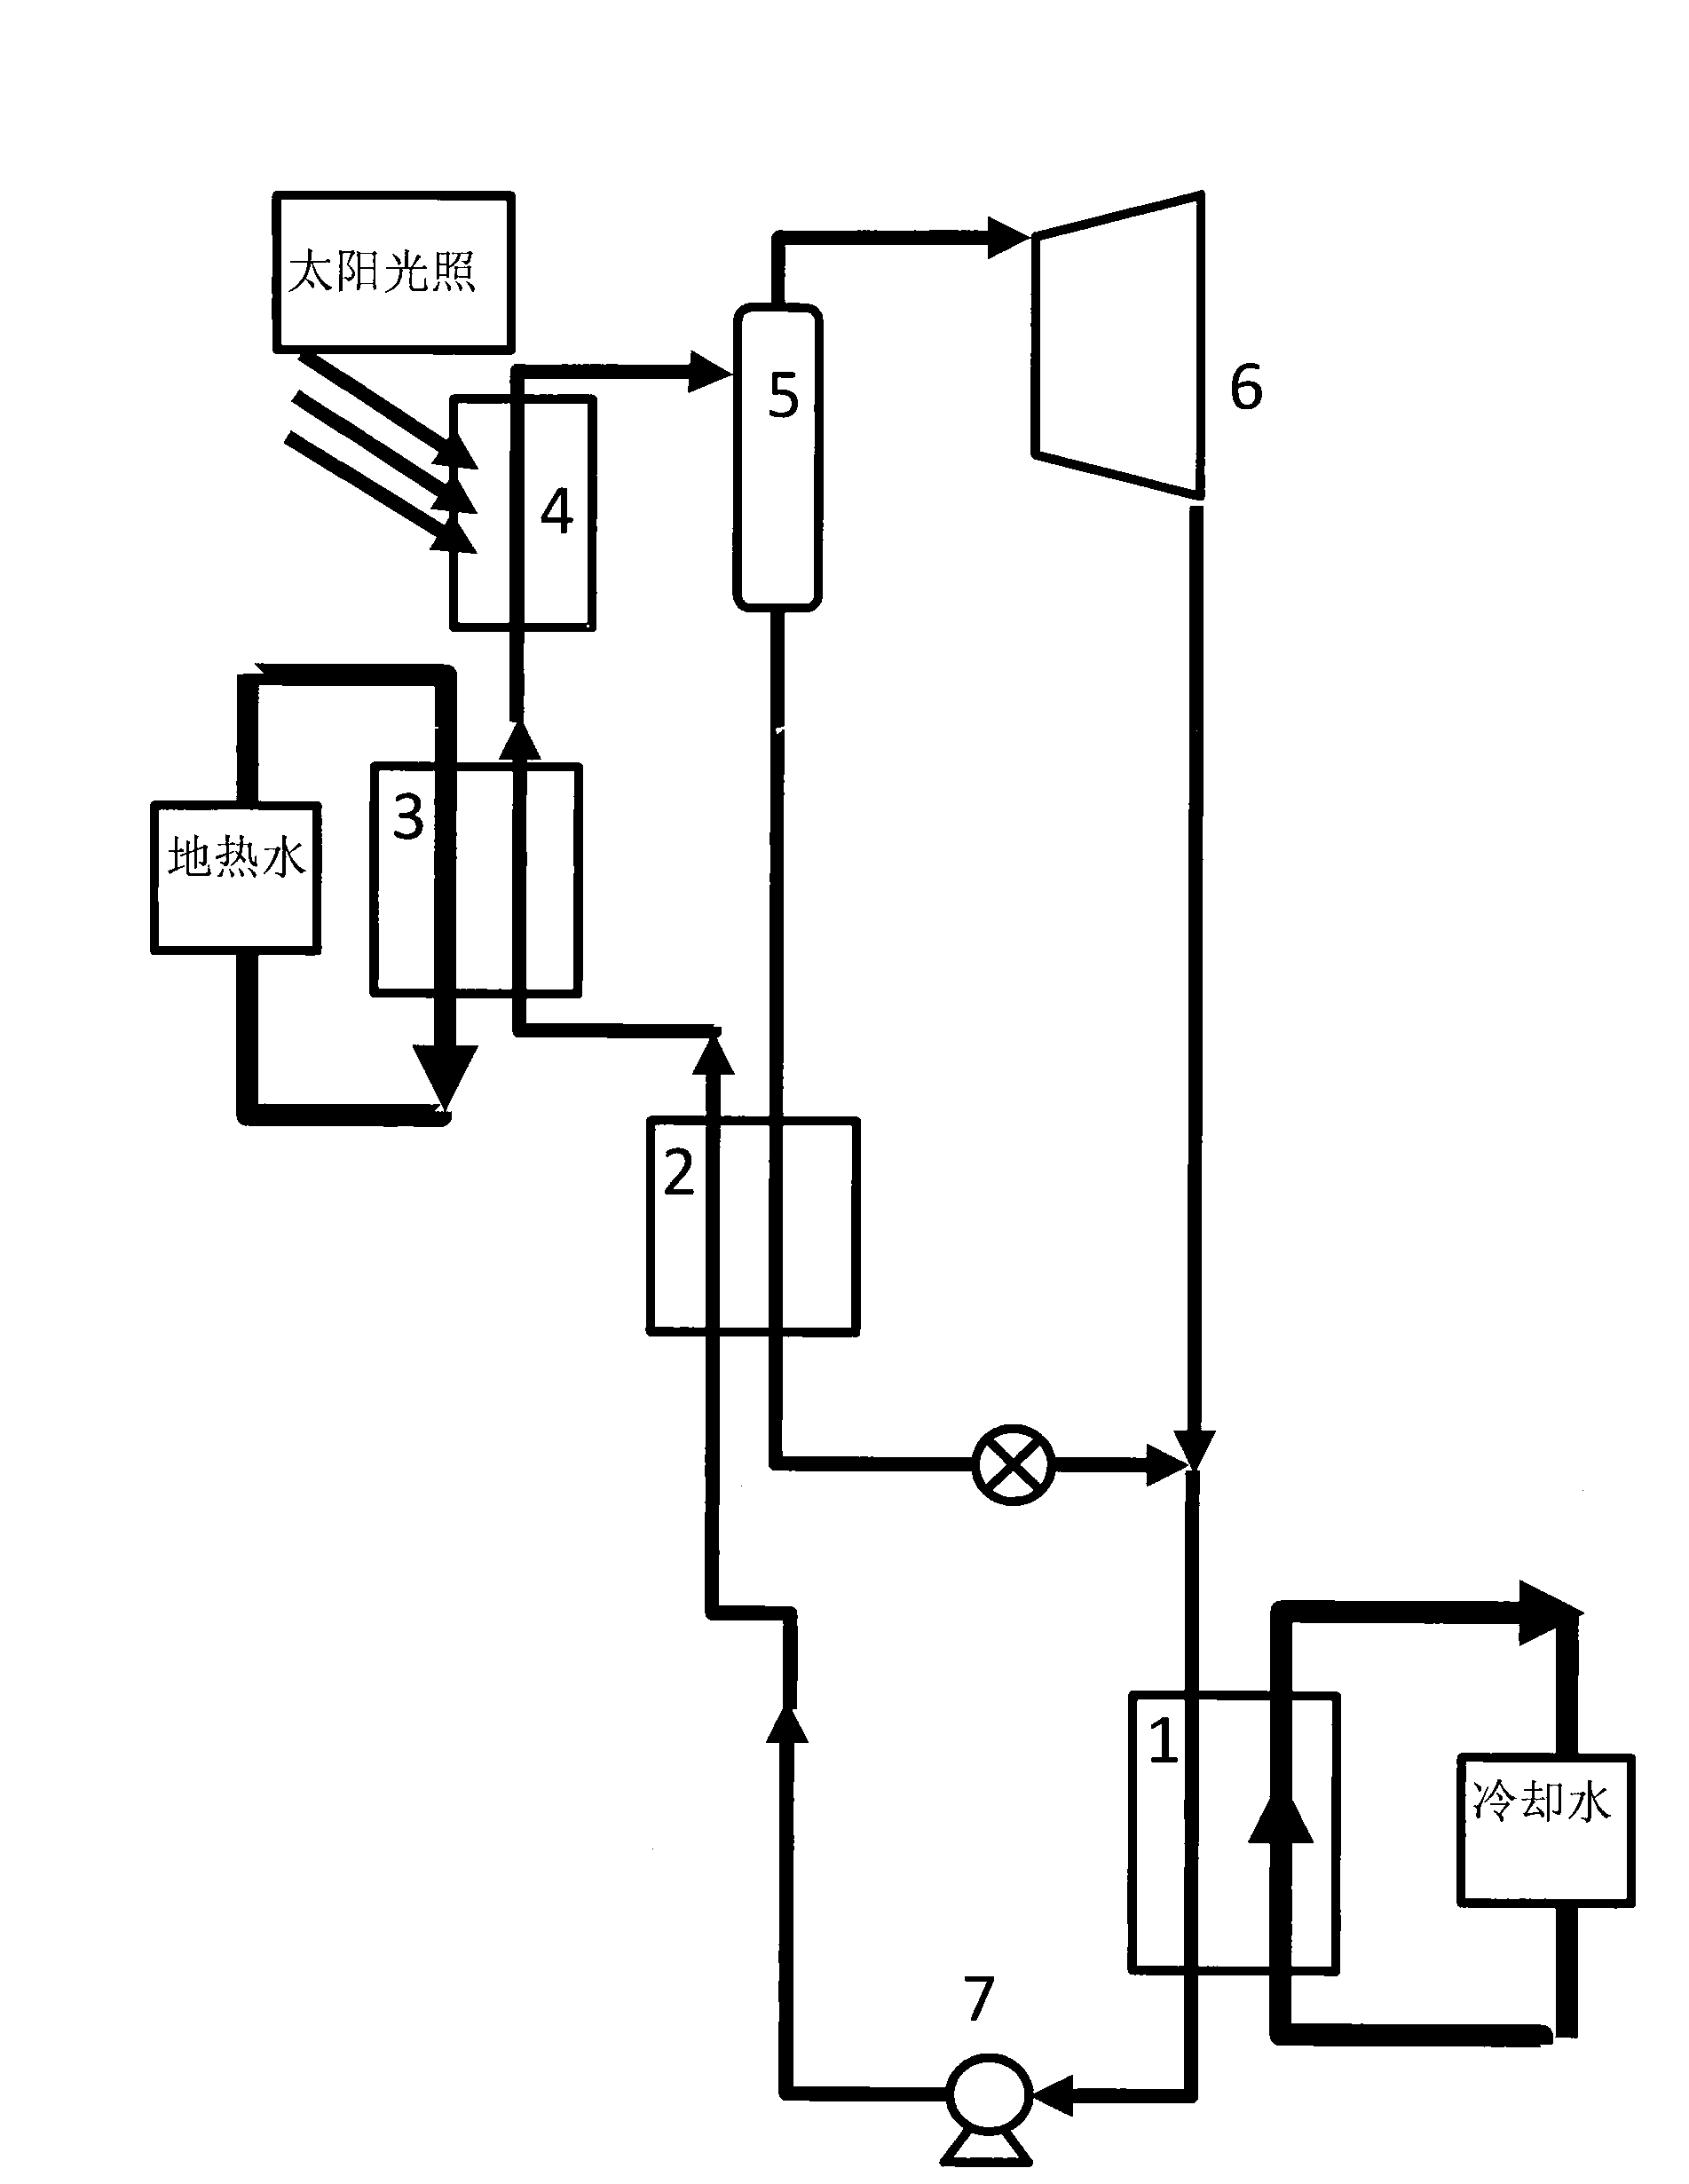 System for improving geothermal energy and solar energy integrated thermoelectric conversion efficiency